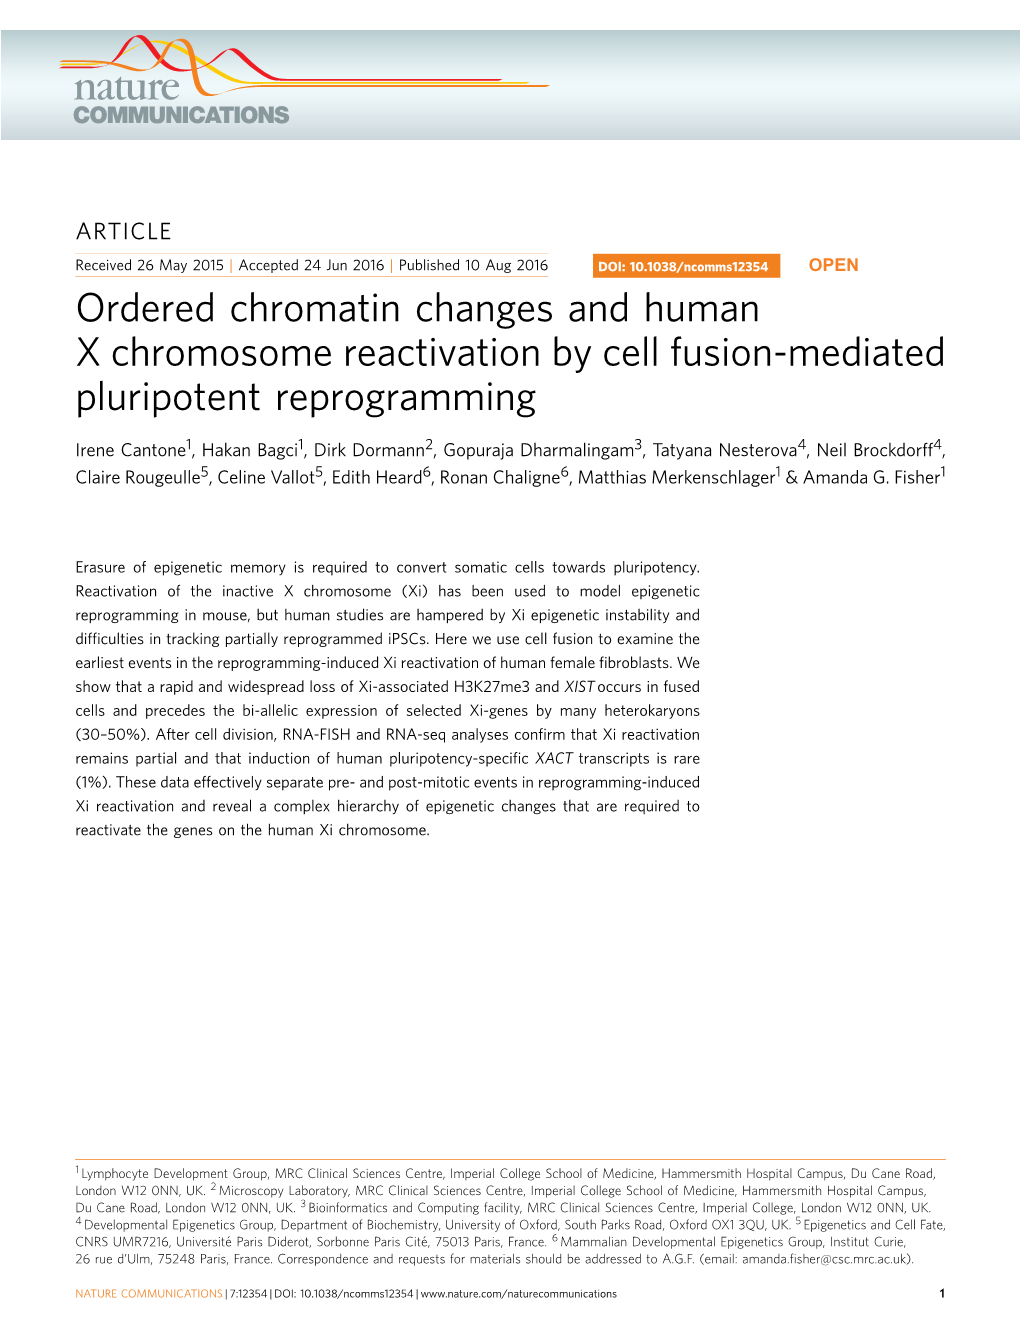 Ordered Chromatin Changes and Human X Chromosome Reactivation by Cell Fusion-Mediated Pluripotent Reprogramming